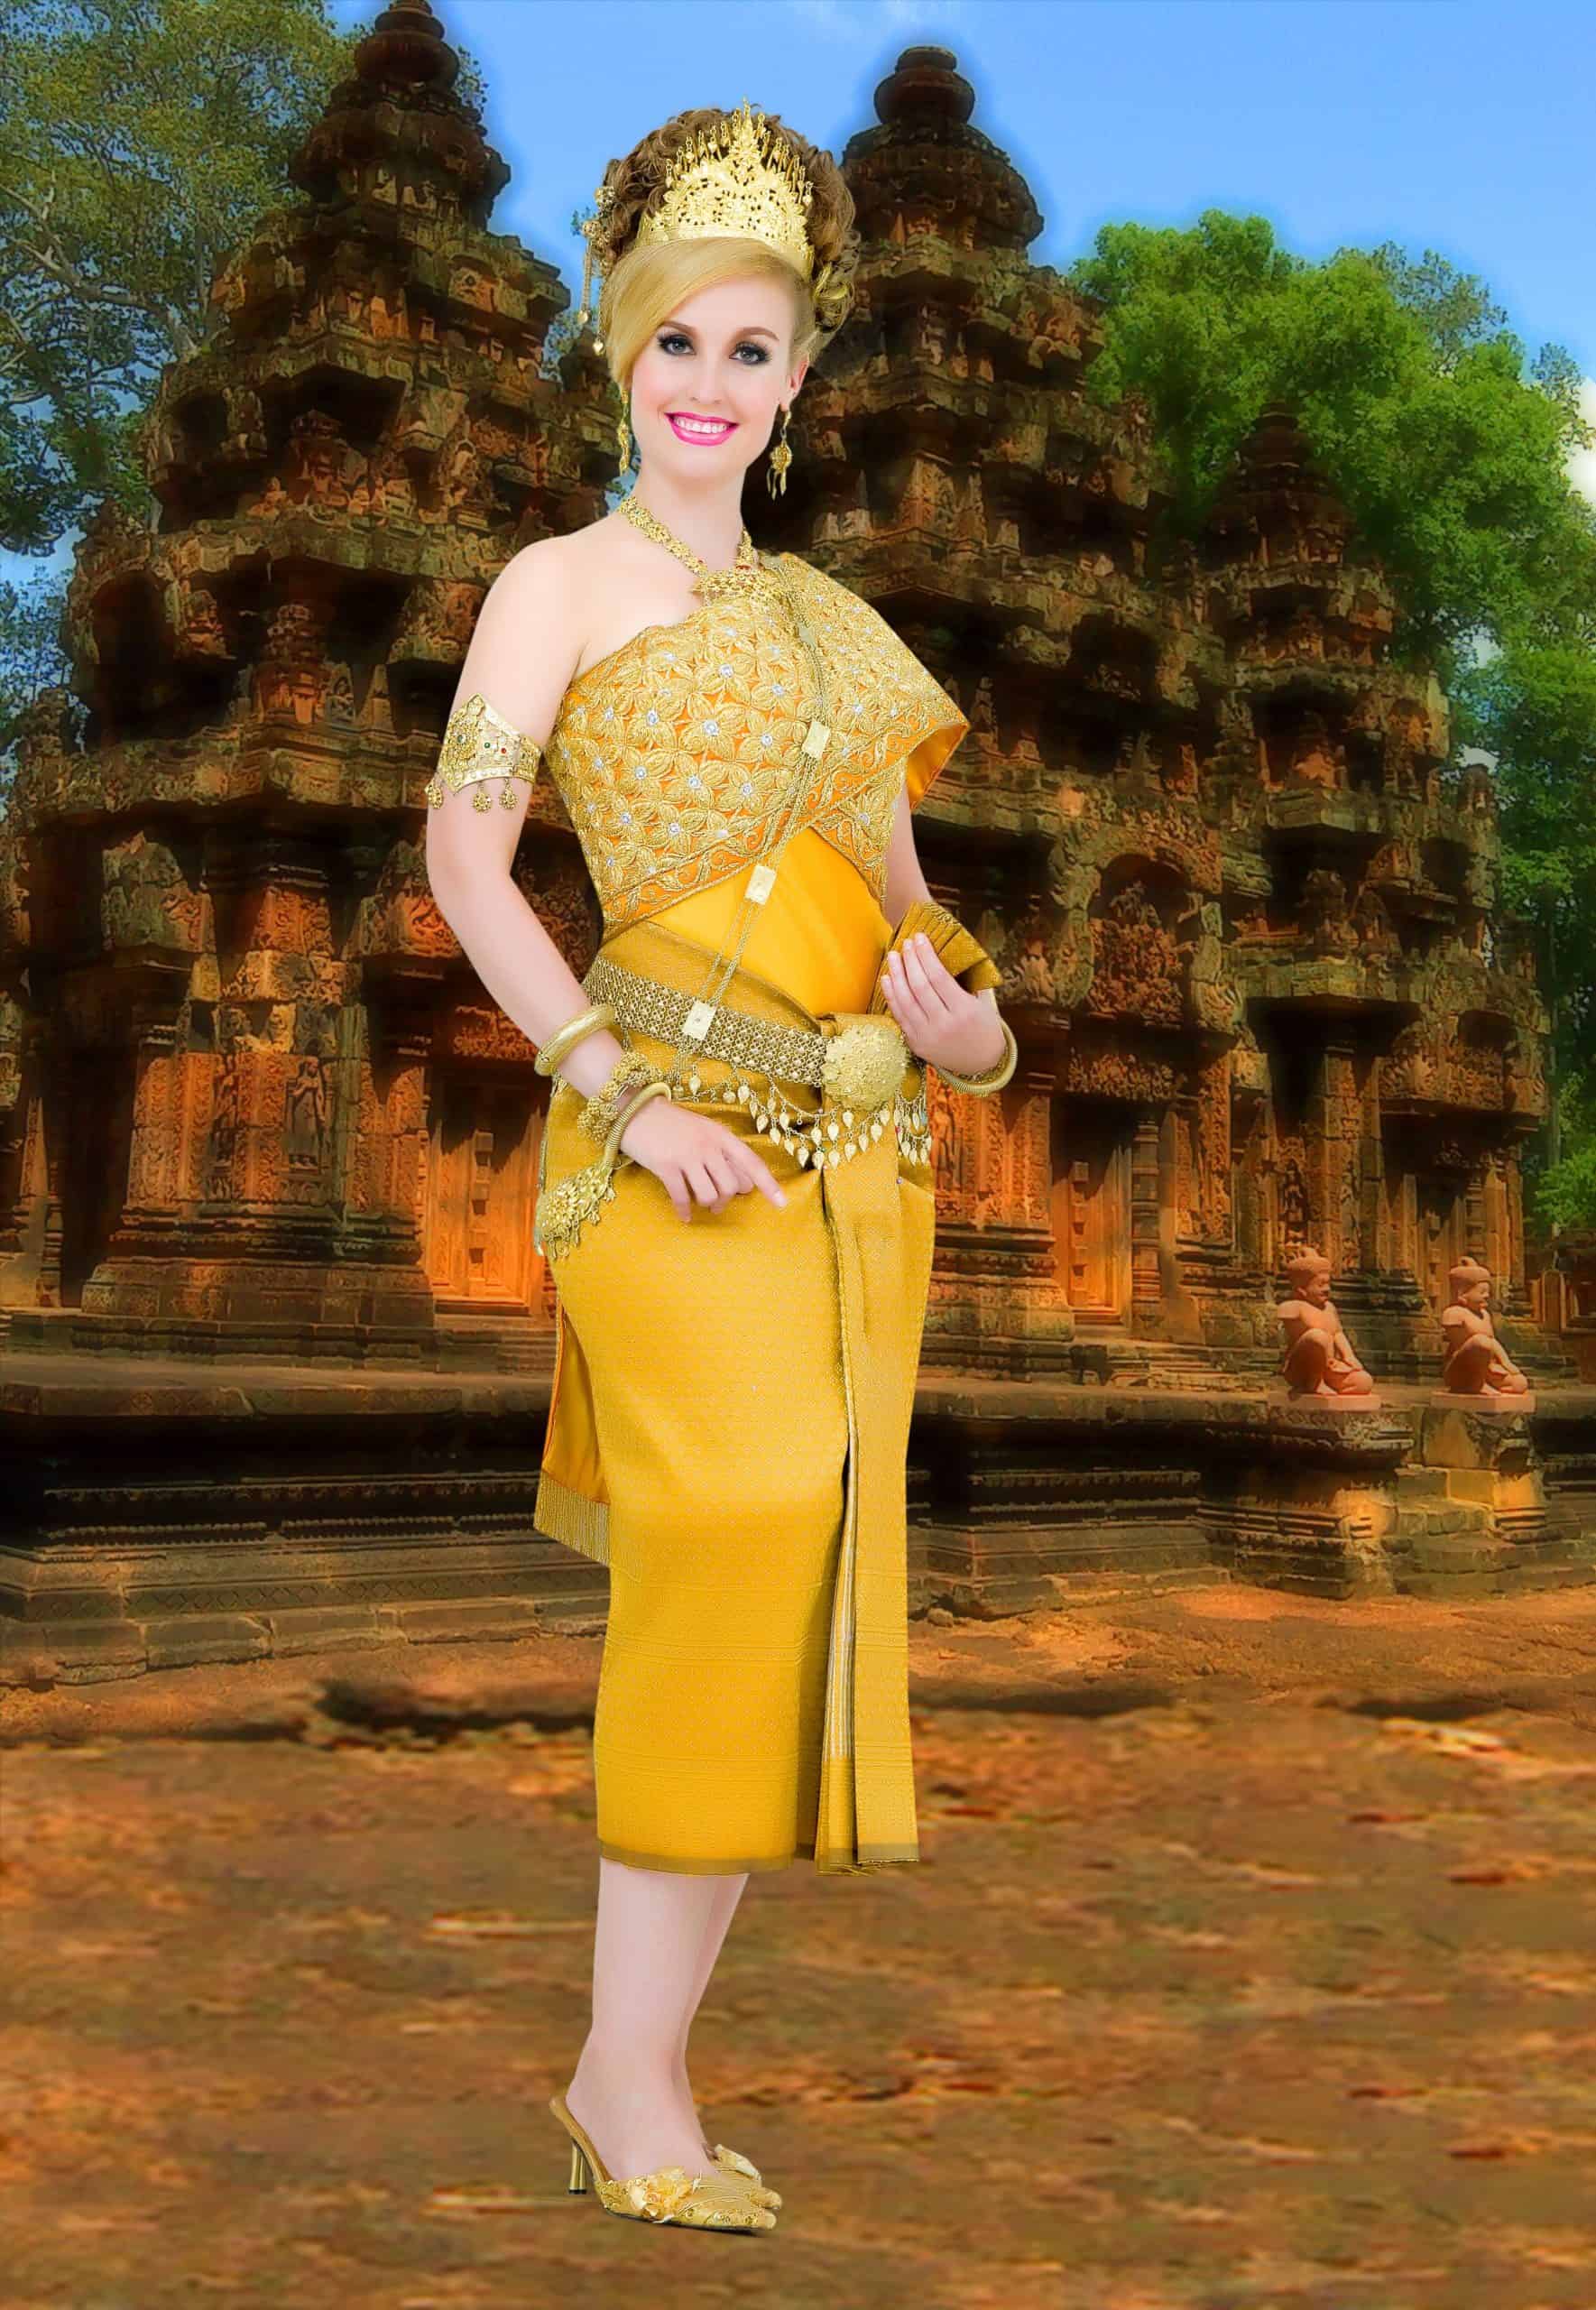 A woman wearing a traditional Cambodian outfit made of gold fabrics, chains, beading, shoes and matching gold hair piece, stands in front of a superimposed image of Angkor Wat.